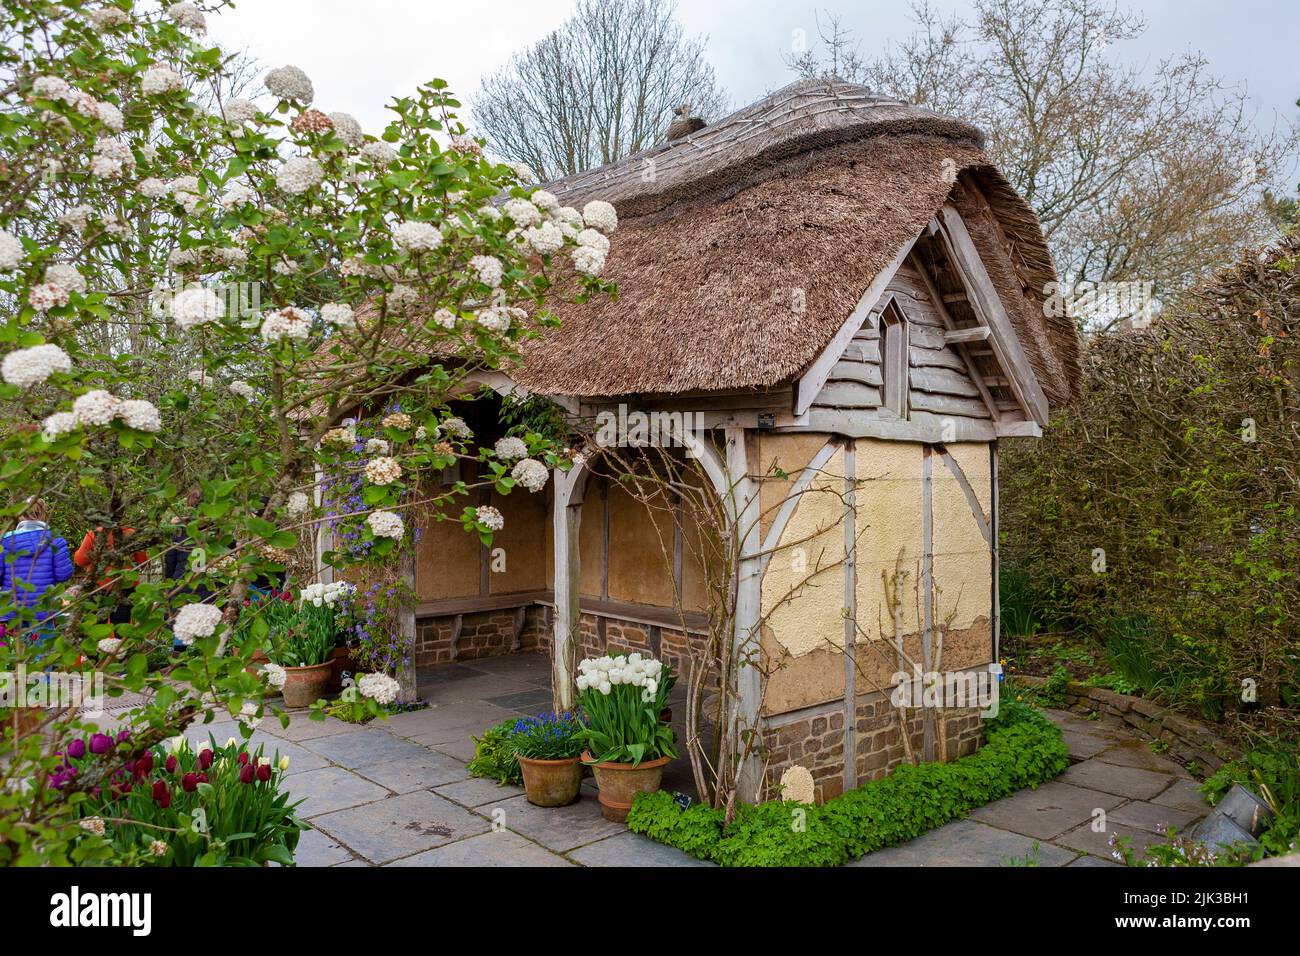 The charming thatched Summer house in The Potager and Cottage Garden, RHS Rosemoor, Devon, UK Stock Photo